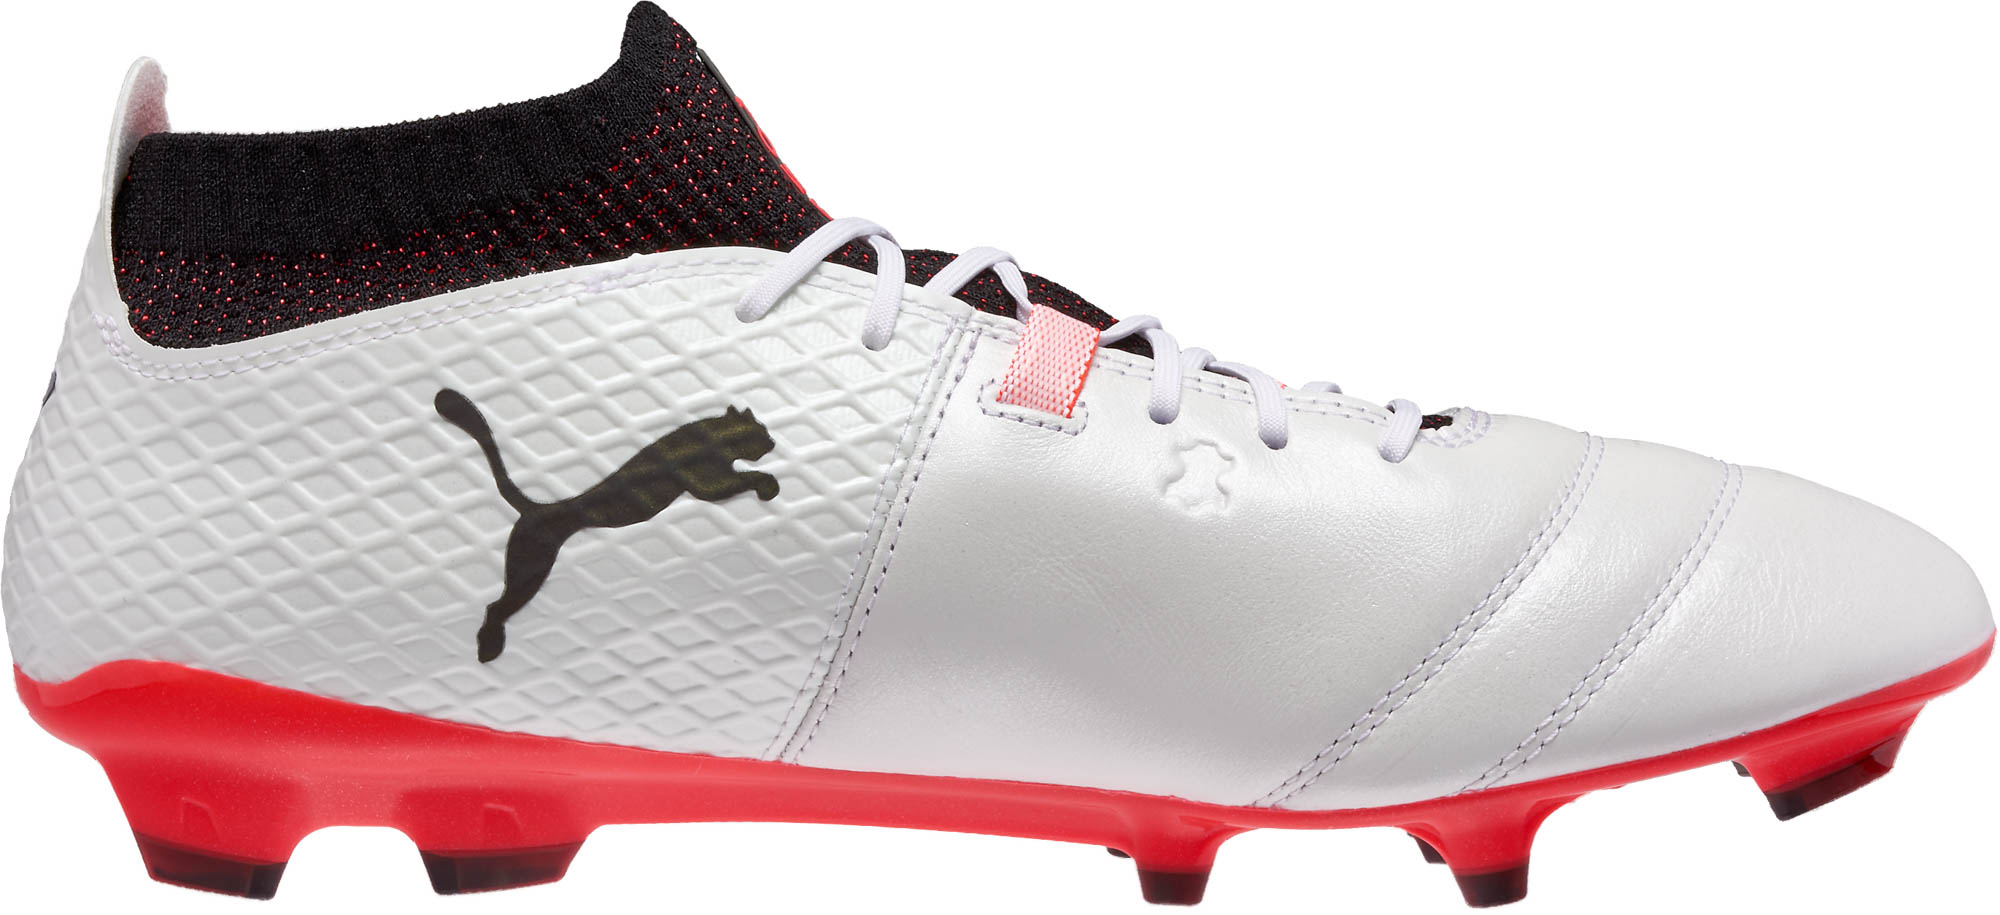 Plantación Levántate Incompetencia Puma One 17.1 FG Soccer Cleats - White & Fiery Coral - Soccer Master